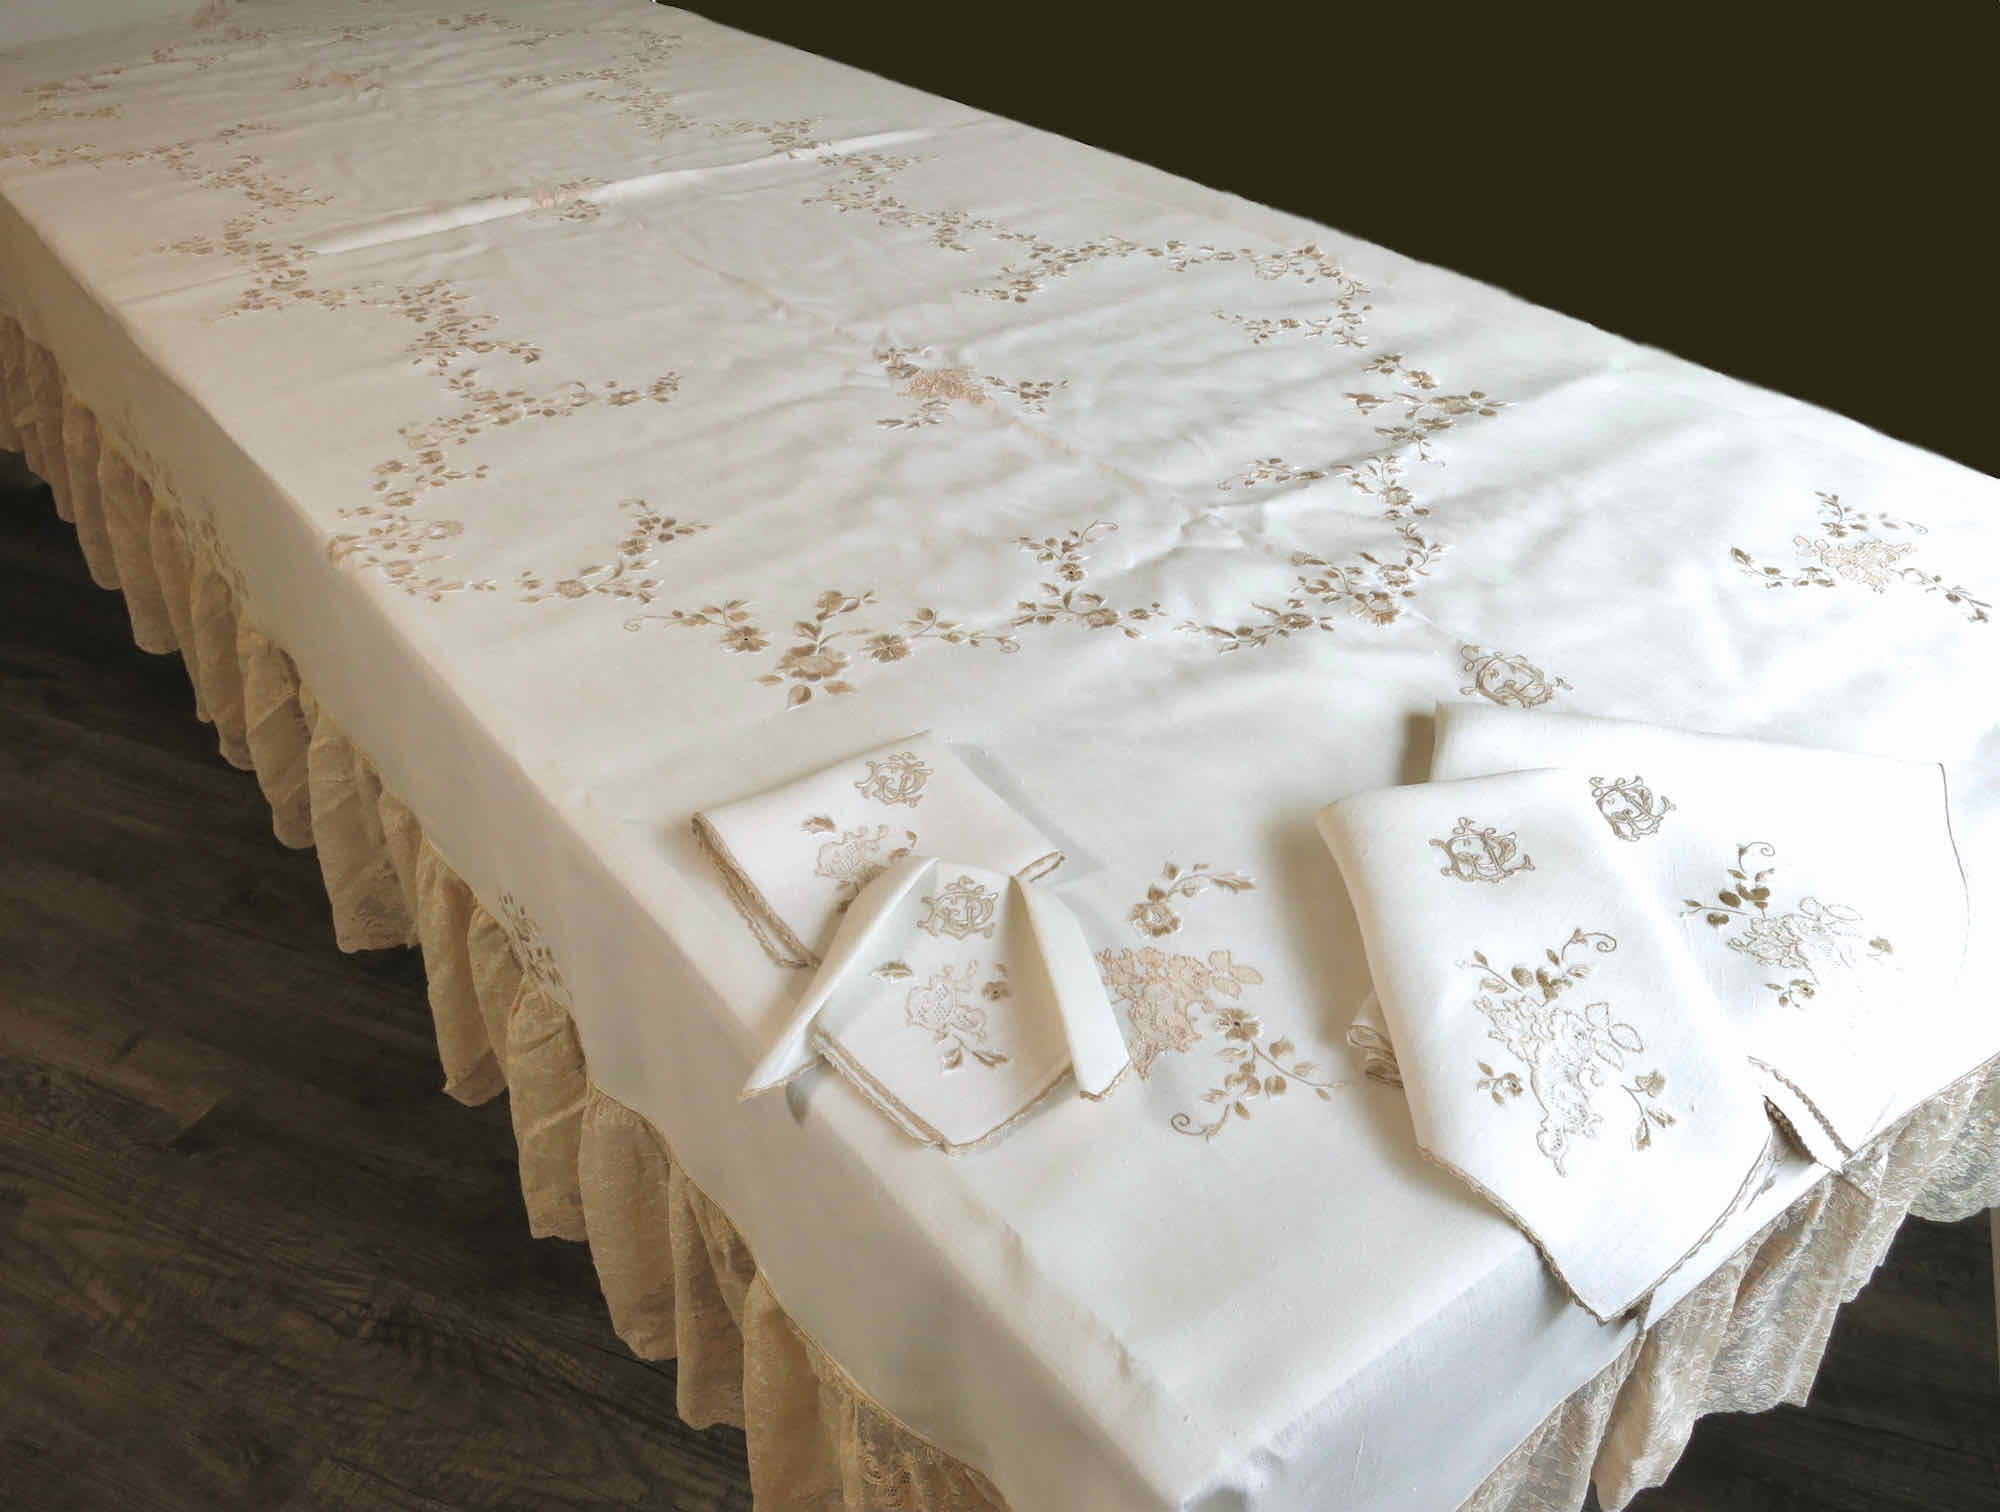 Ruffled French Lace Vintage Tablecloth 68x130" w/ 12 Large & 12 Small Napkins